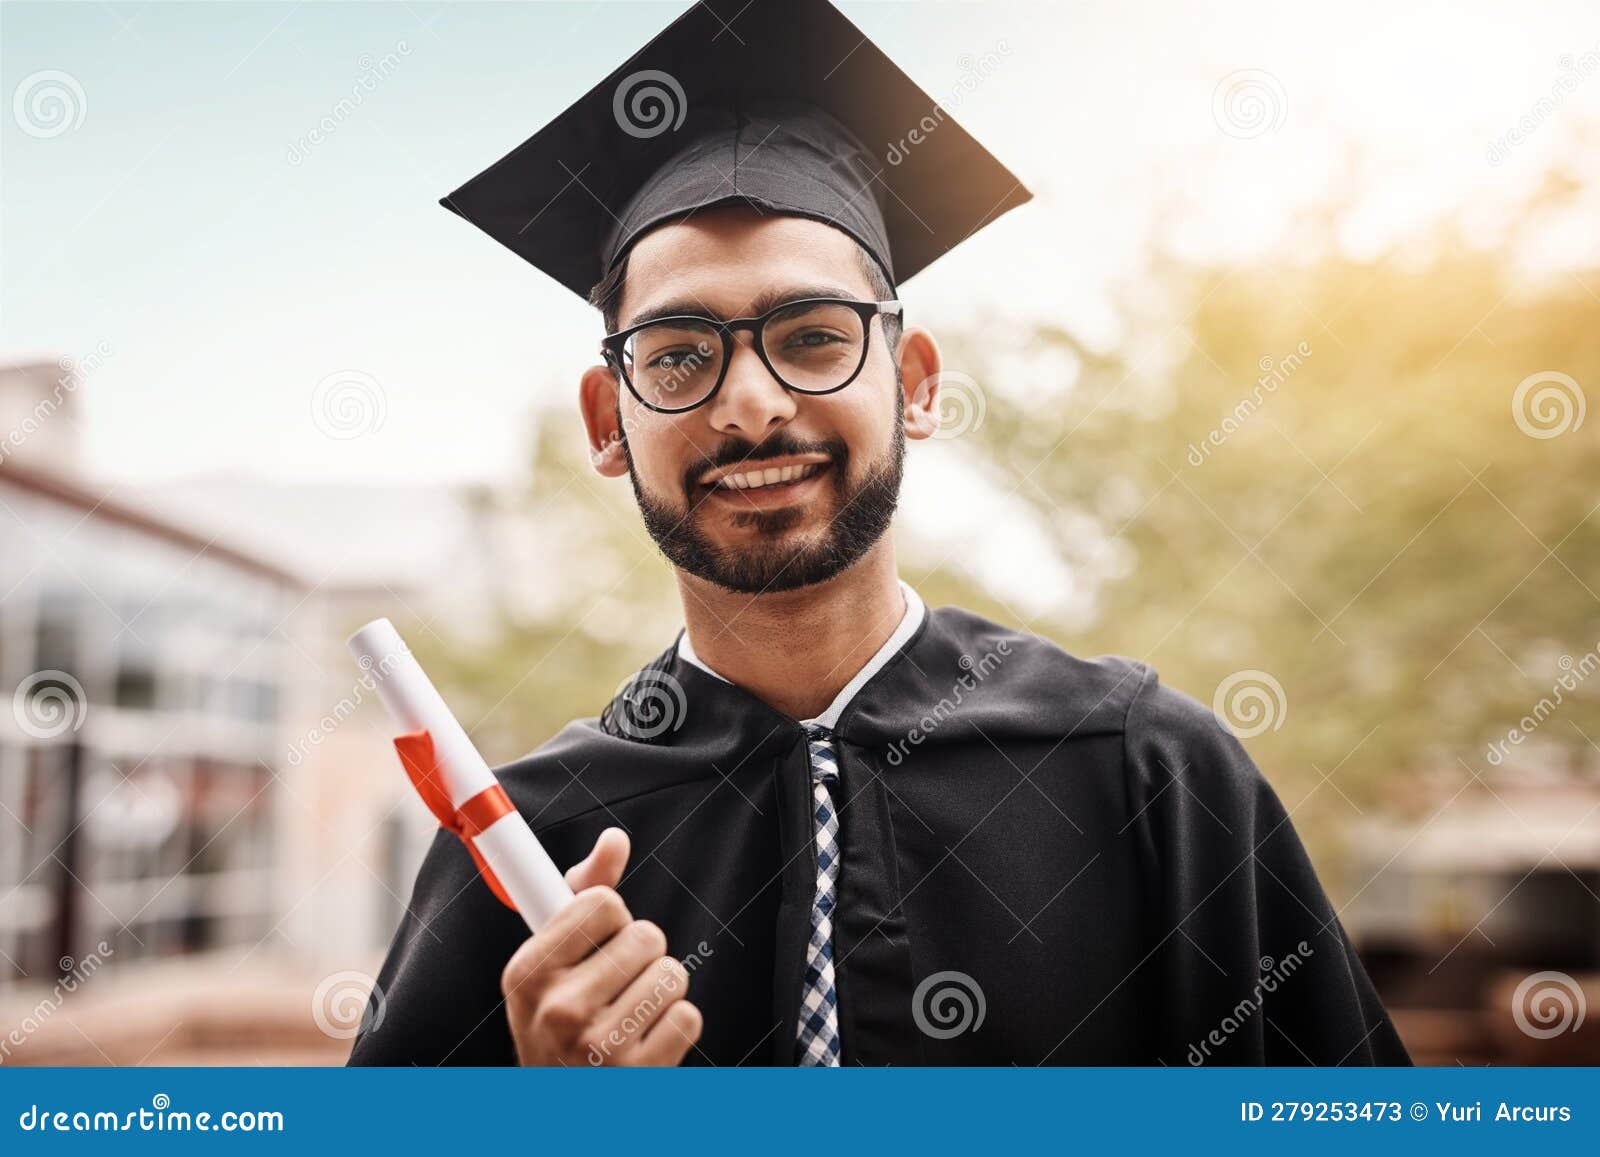 Man, Graduation and Portrait of a College Student with a Diploma and ...